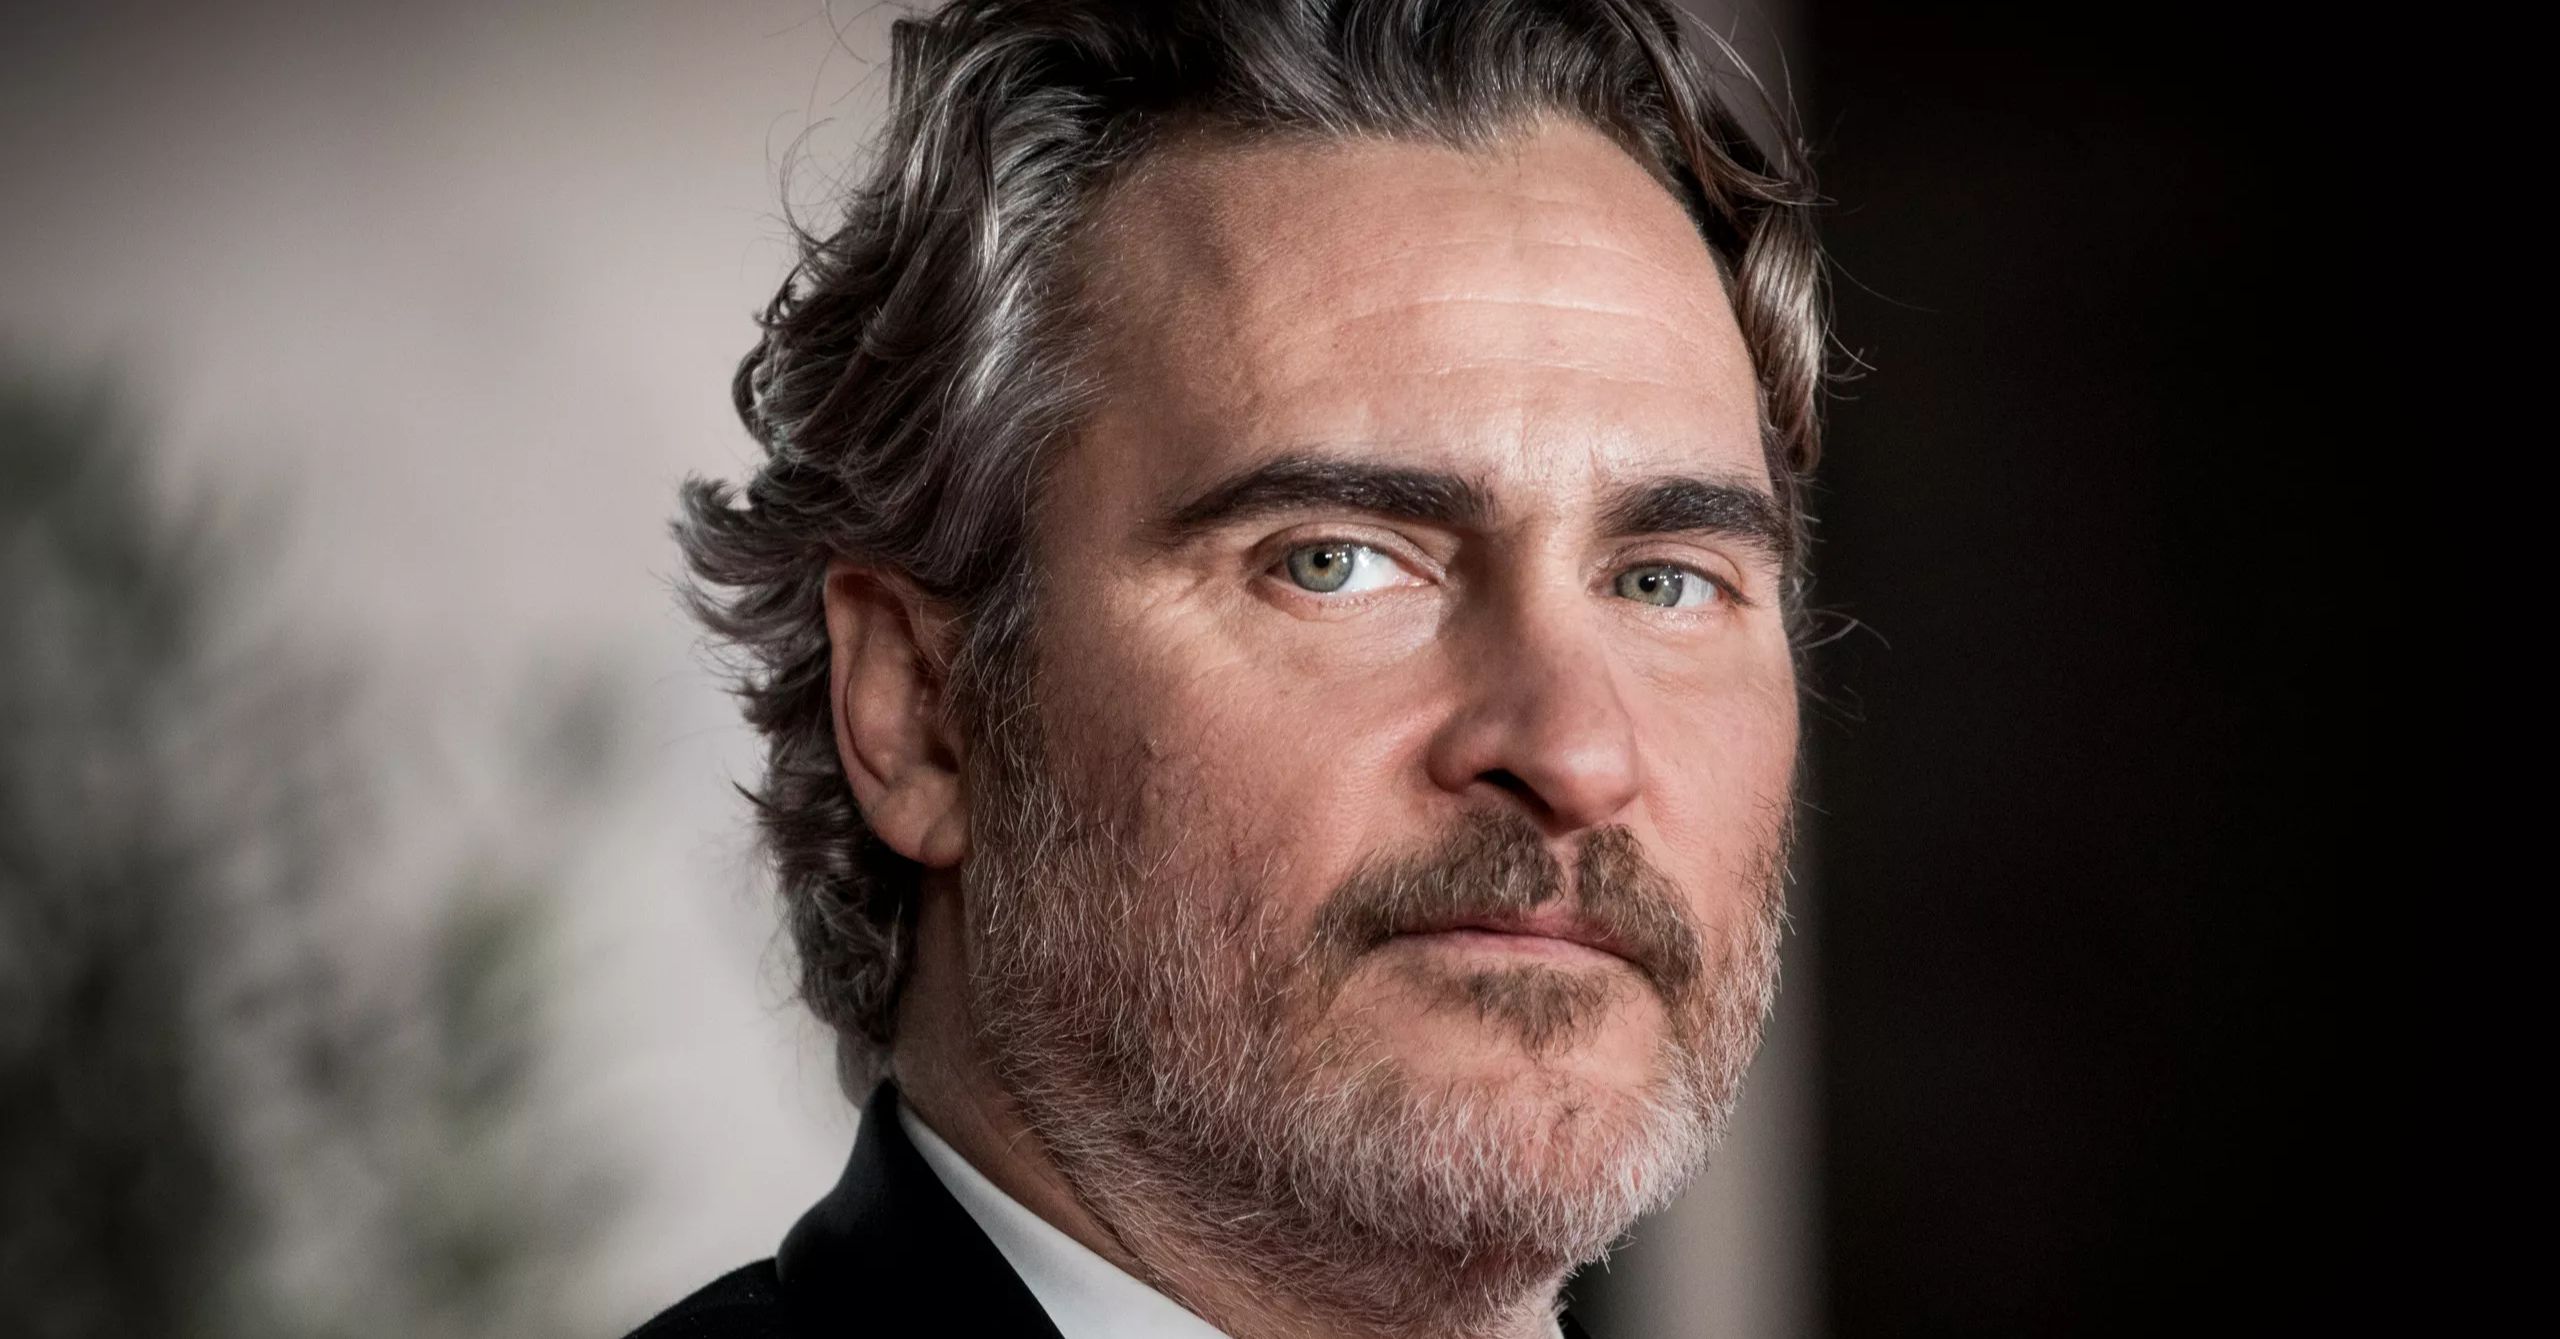 Joaquin Phoenix Speaks About Humility and the 'Fight Against Injustice' in Oscar ...2560 x 1339